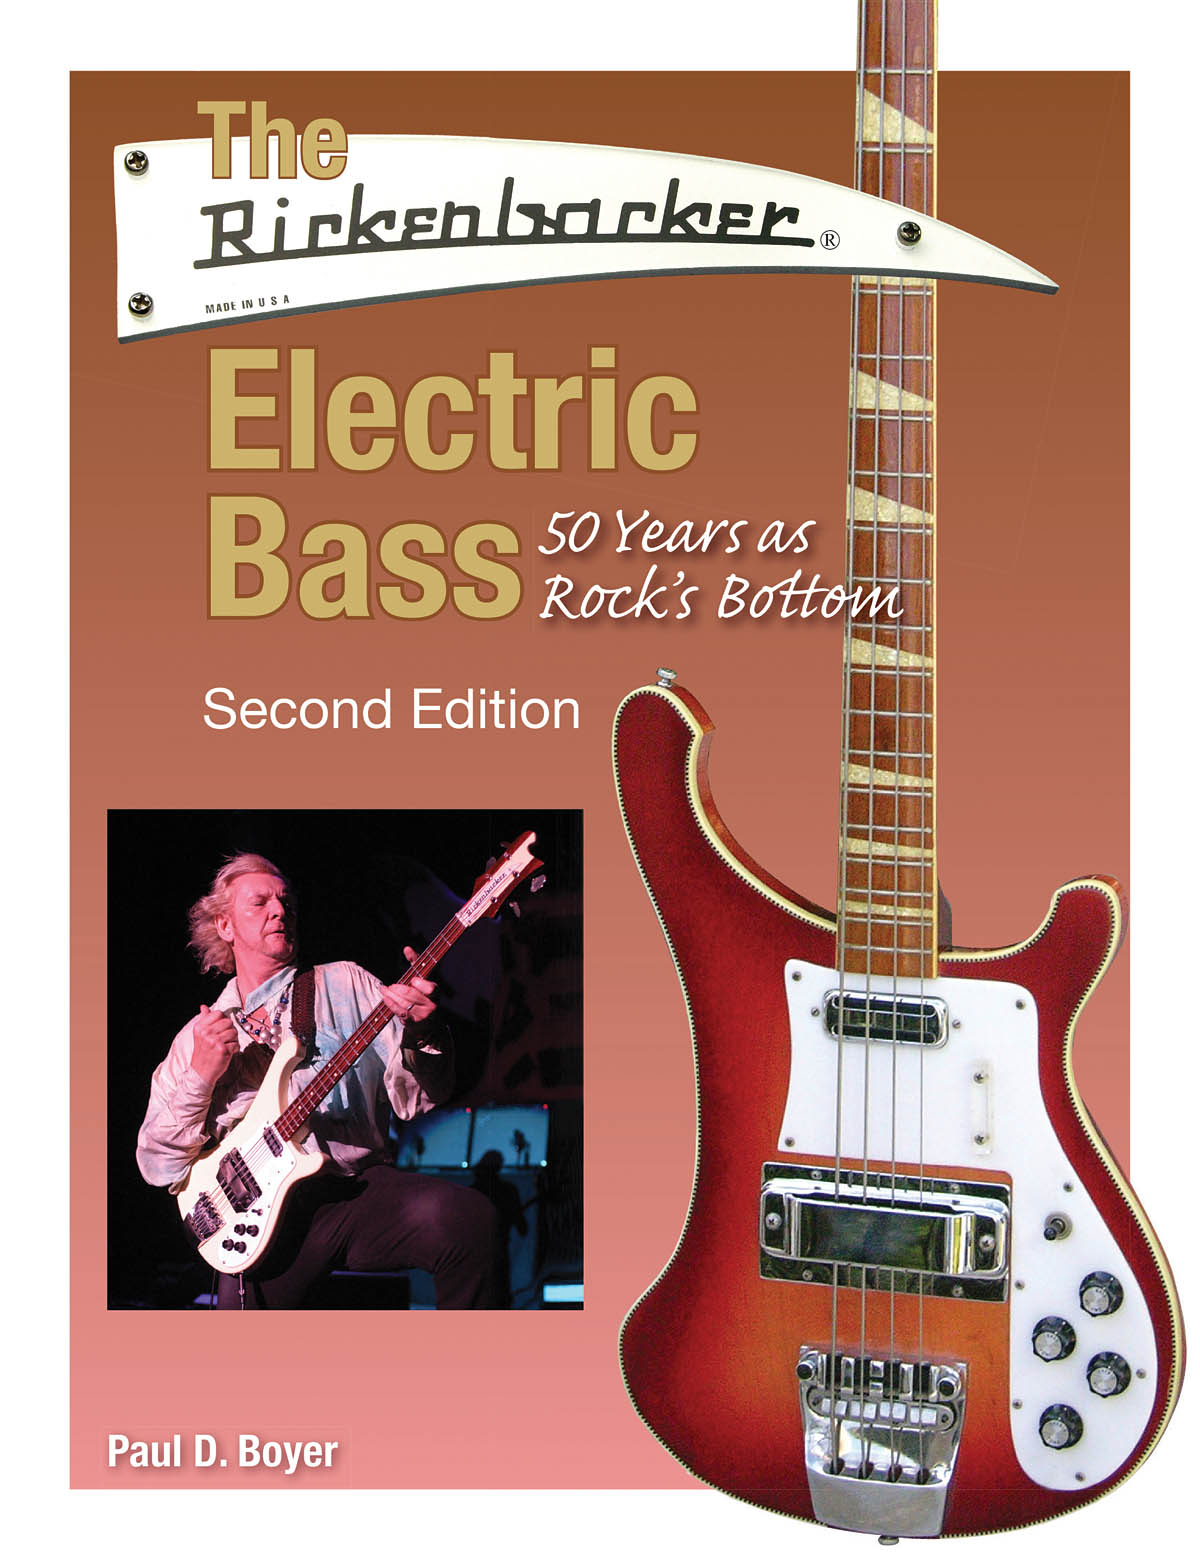 Paul D. Boyer: The Rickenbacker Electric Bass - Second Edition: Reference Books: